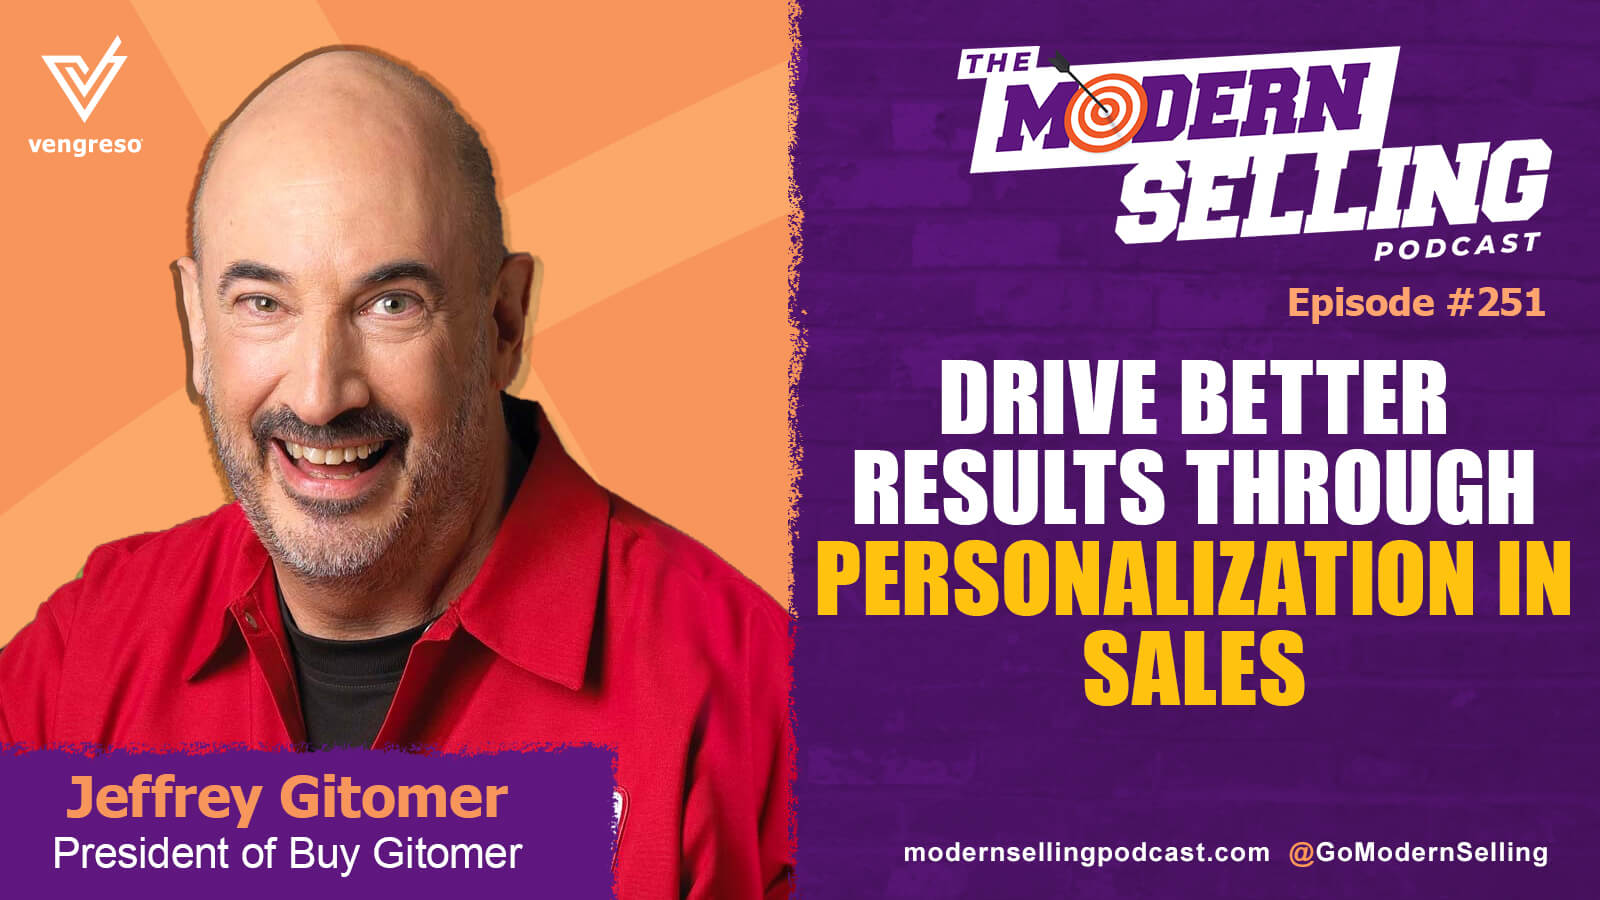 Drive better results through personalization in sales by tailoring your approach to each individual customer. By understanding their needs, preferences, and pain points, you can deliver a personalized sales experience that builds trust